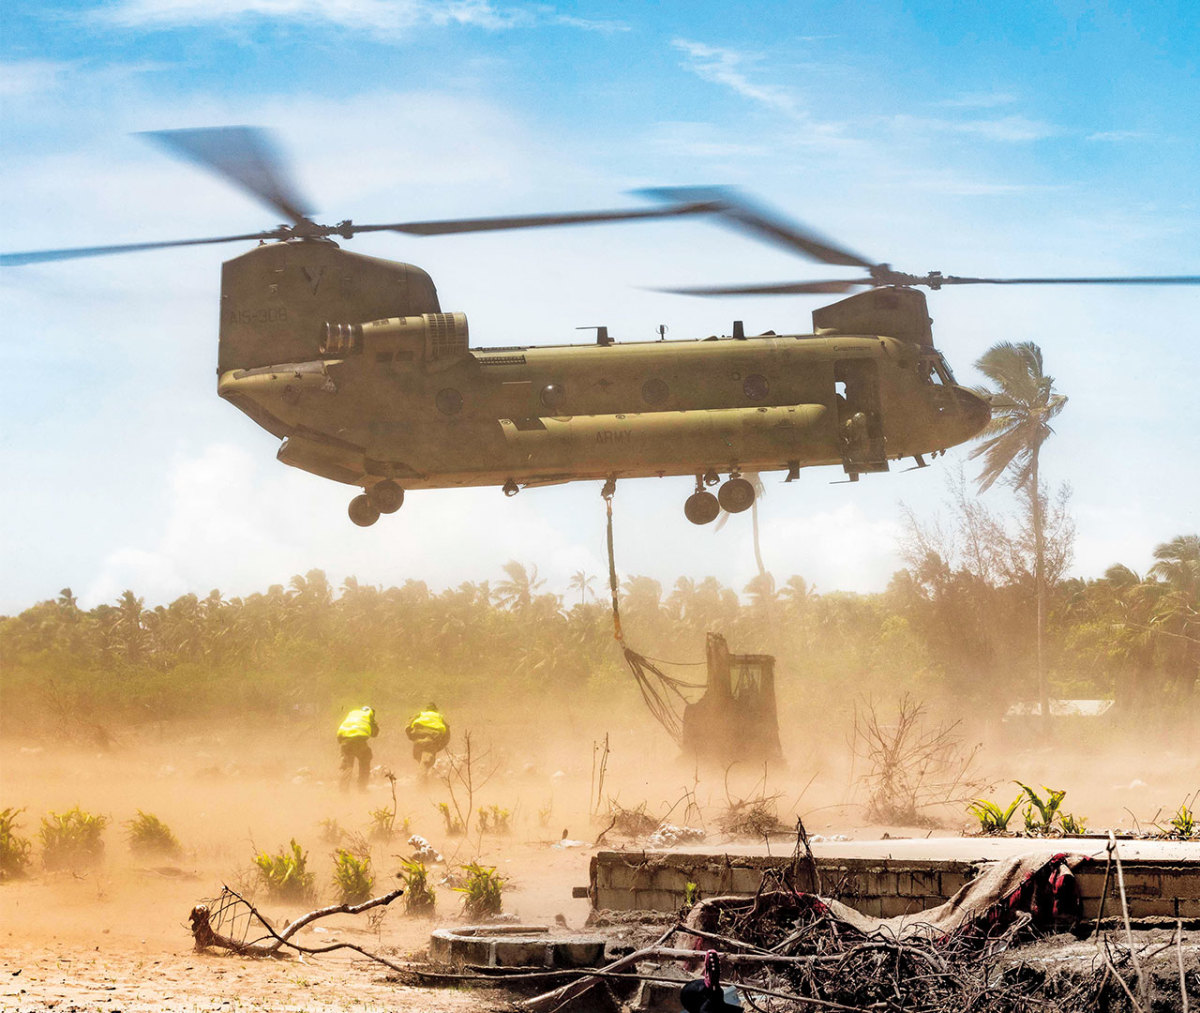 Army CH-47F Chinook helicopter lands to provide aid.